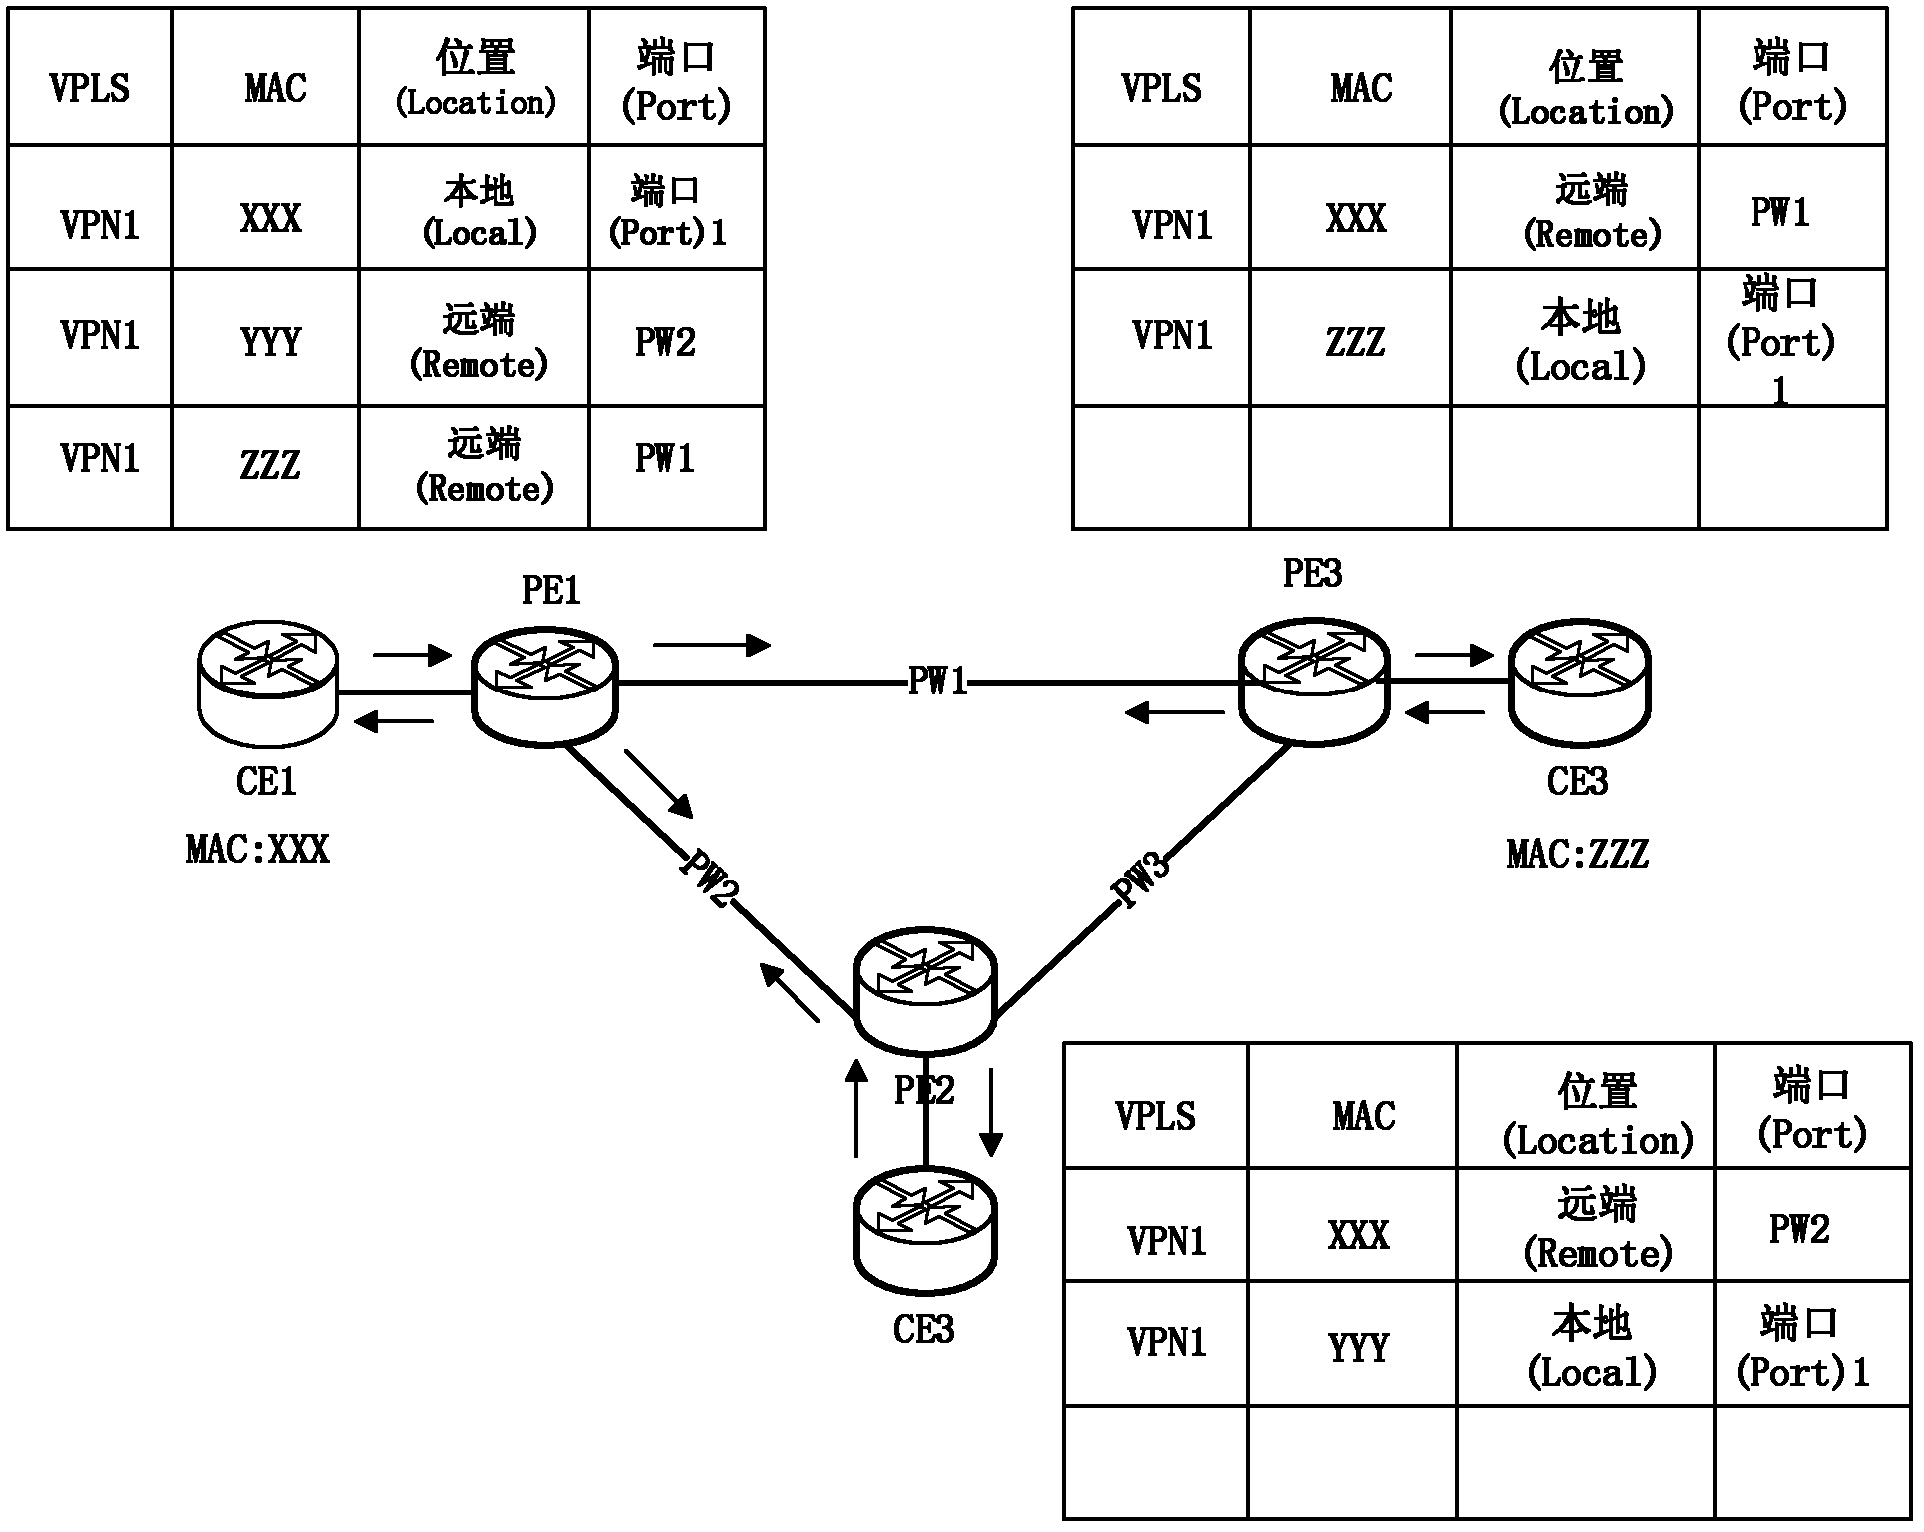 MAC (Media Access Control) address withdrawing method in VPLS (Virtual Private Local Area Network Service) network and PE (Provider Edge) equipment